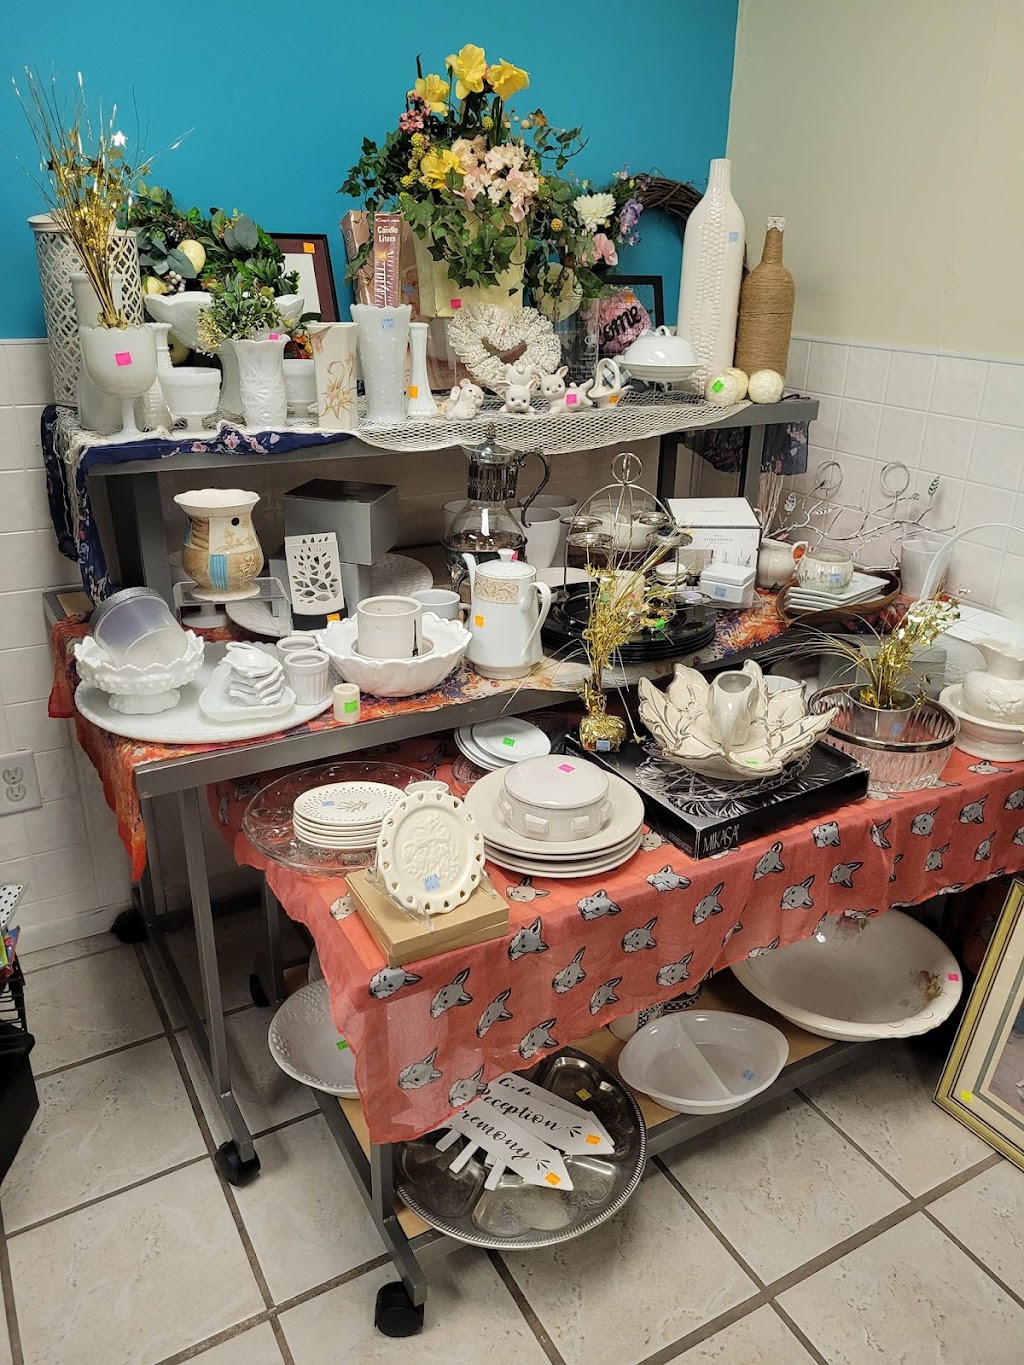 Nine Lives Thrift Store | 201 S 3rd St, Coopersburg, PA 18036 | Phone: (484) 863-9022